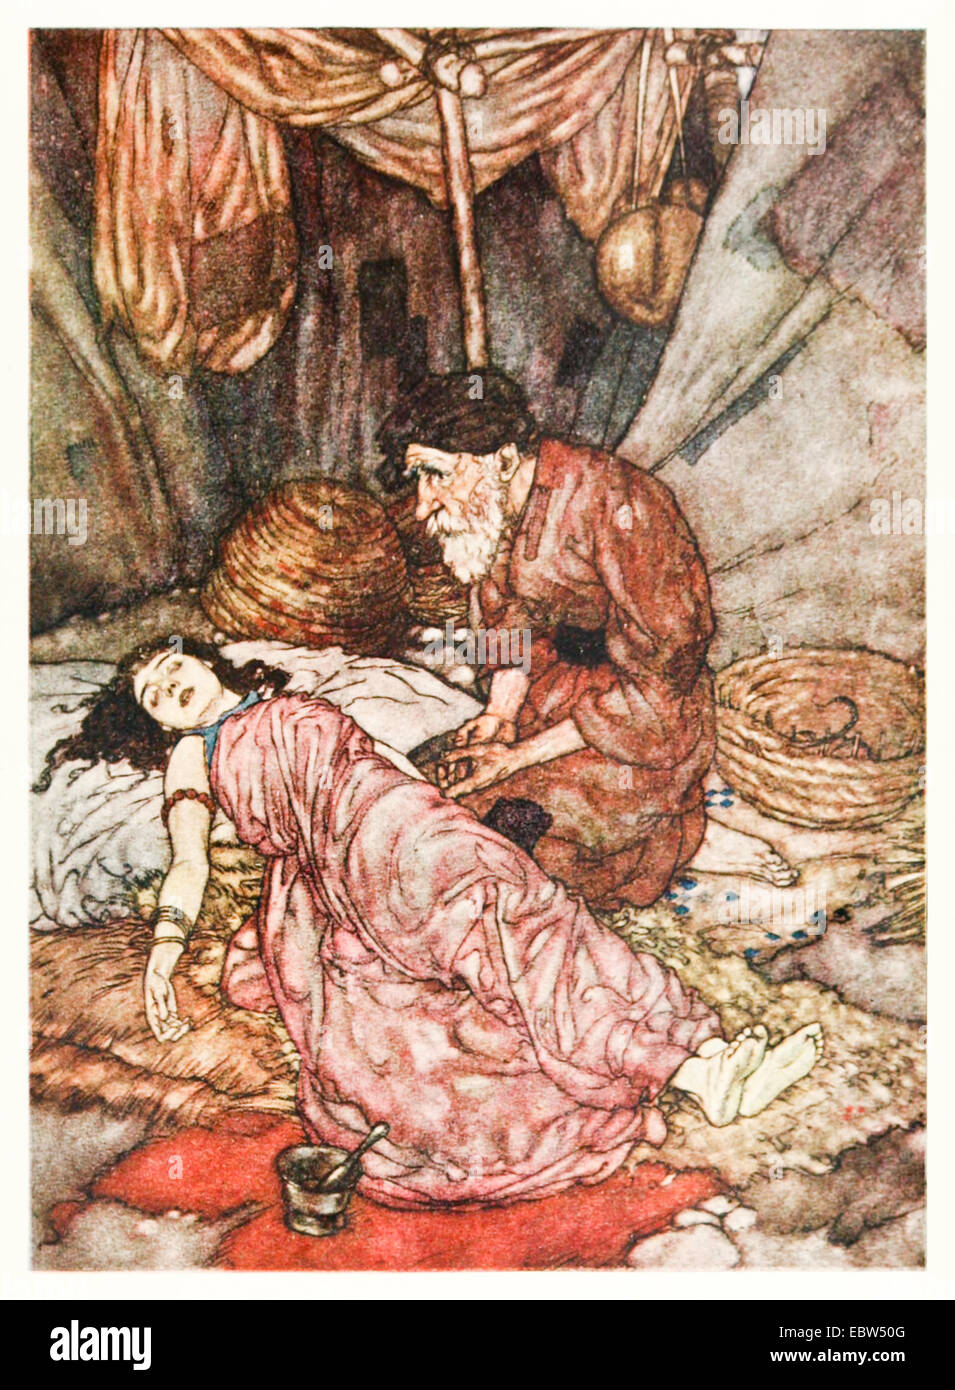 'Oh Thou, who man of baser...' - Edmund Dulac illustration from ‘Rubáiyát of Omar Khayyám’. See description for more information Stock Photo